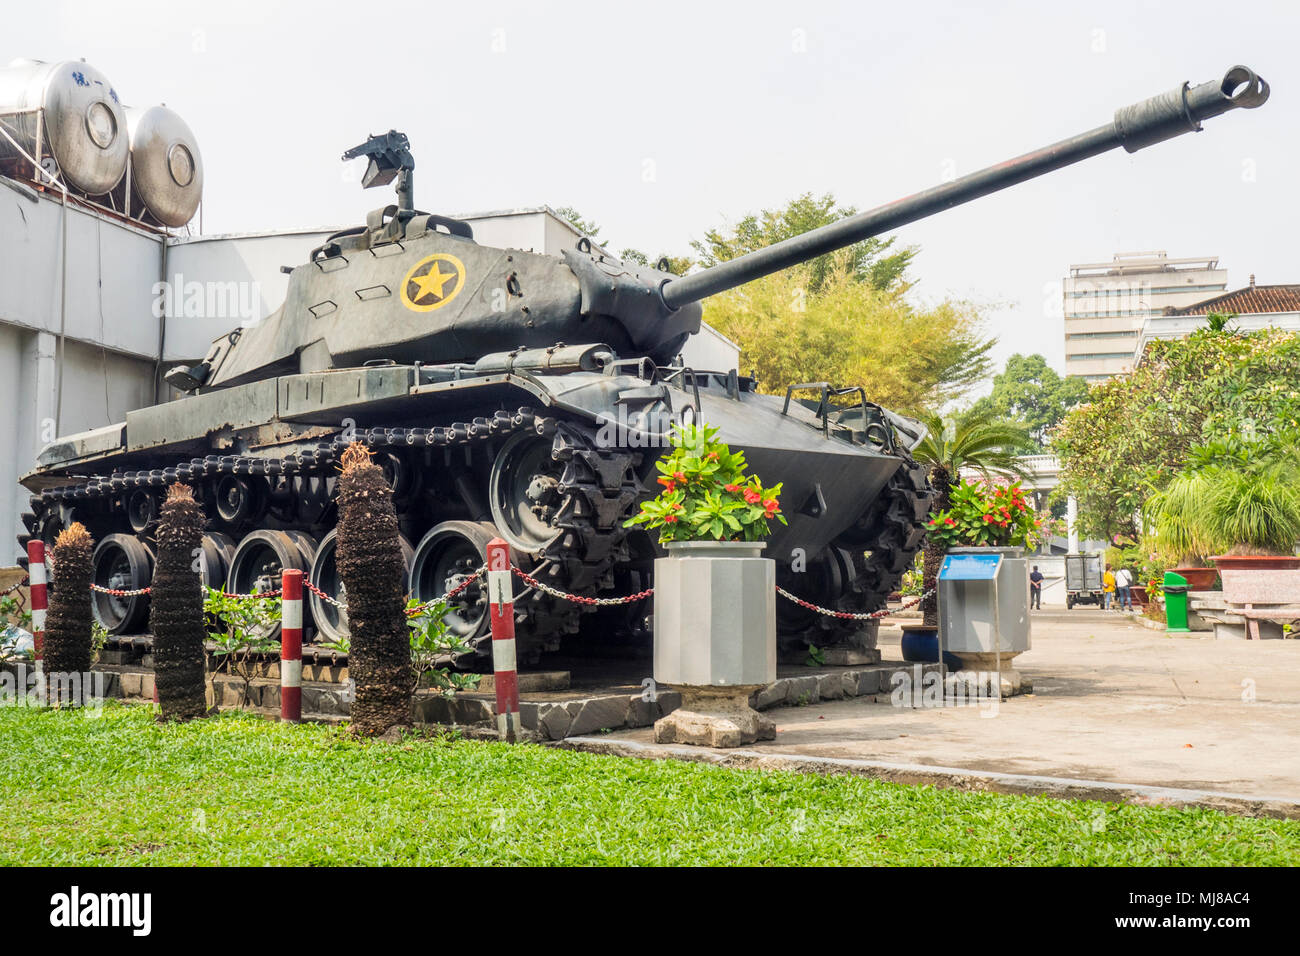 An American M41 Walker Bulldog tank used in the Vietnam War on display outside Gia Long Palace now the Ho Chi Minh City Museum, Vietnam. Stock Photo